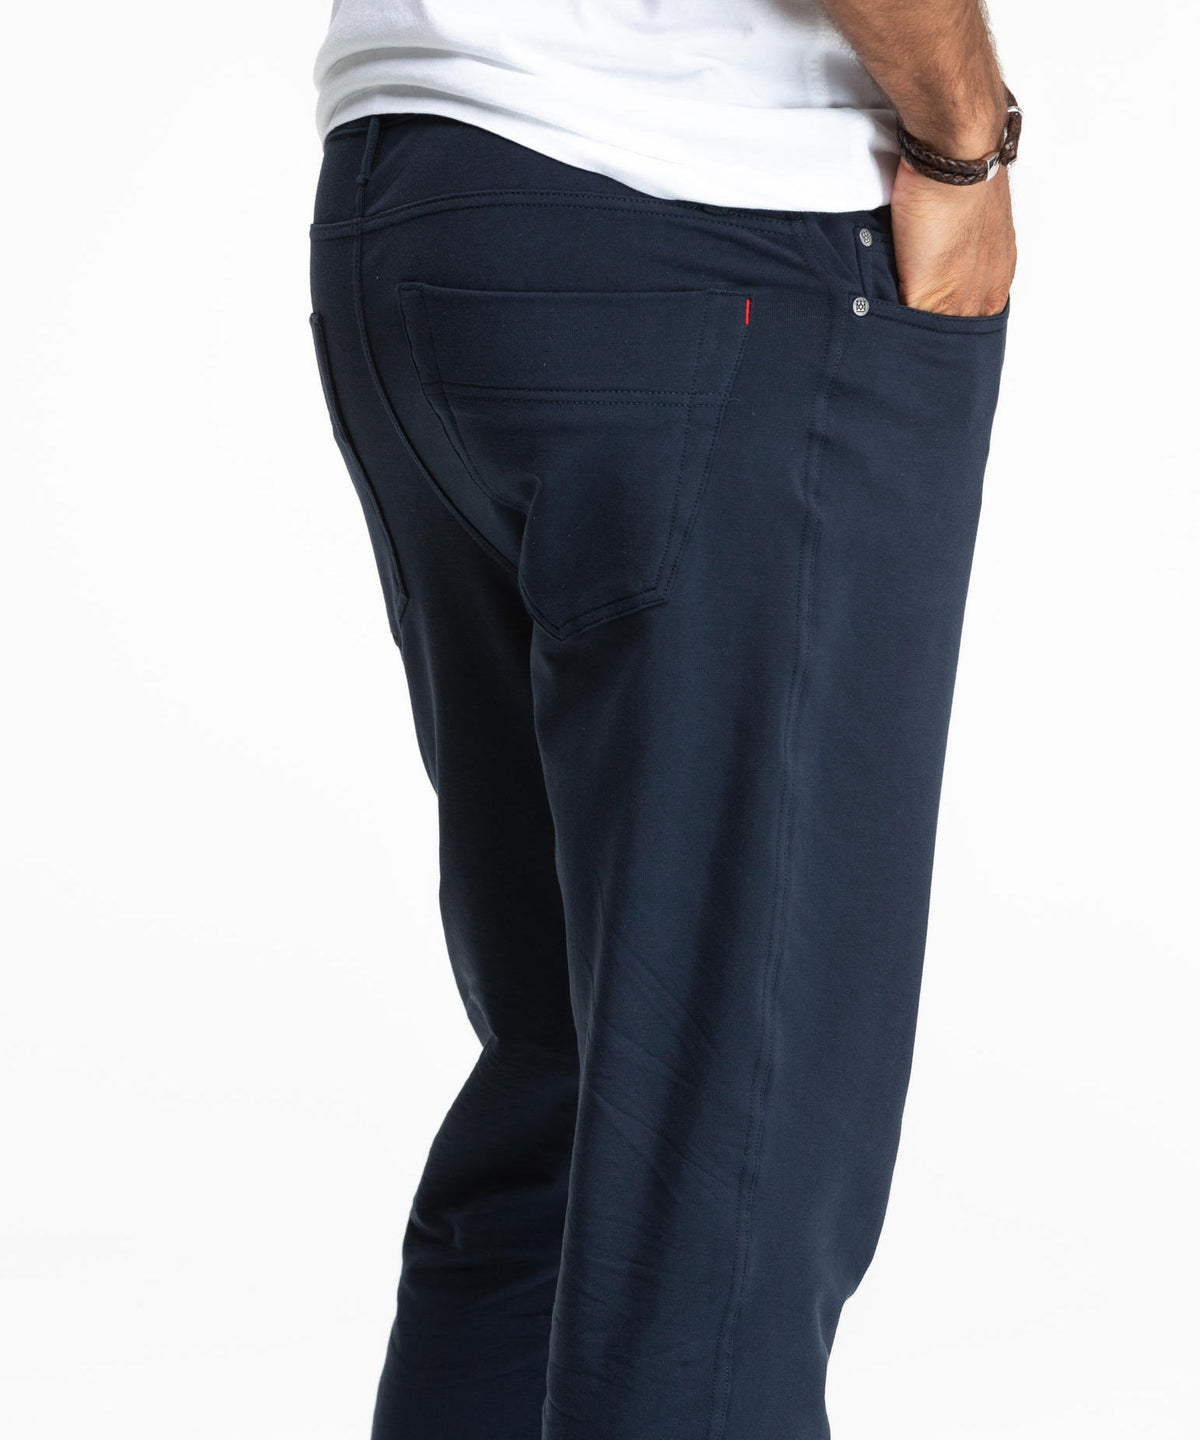 SWET Tailor All-in Stretch 5-Pocket Pant